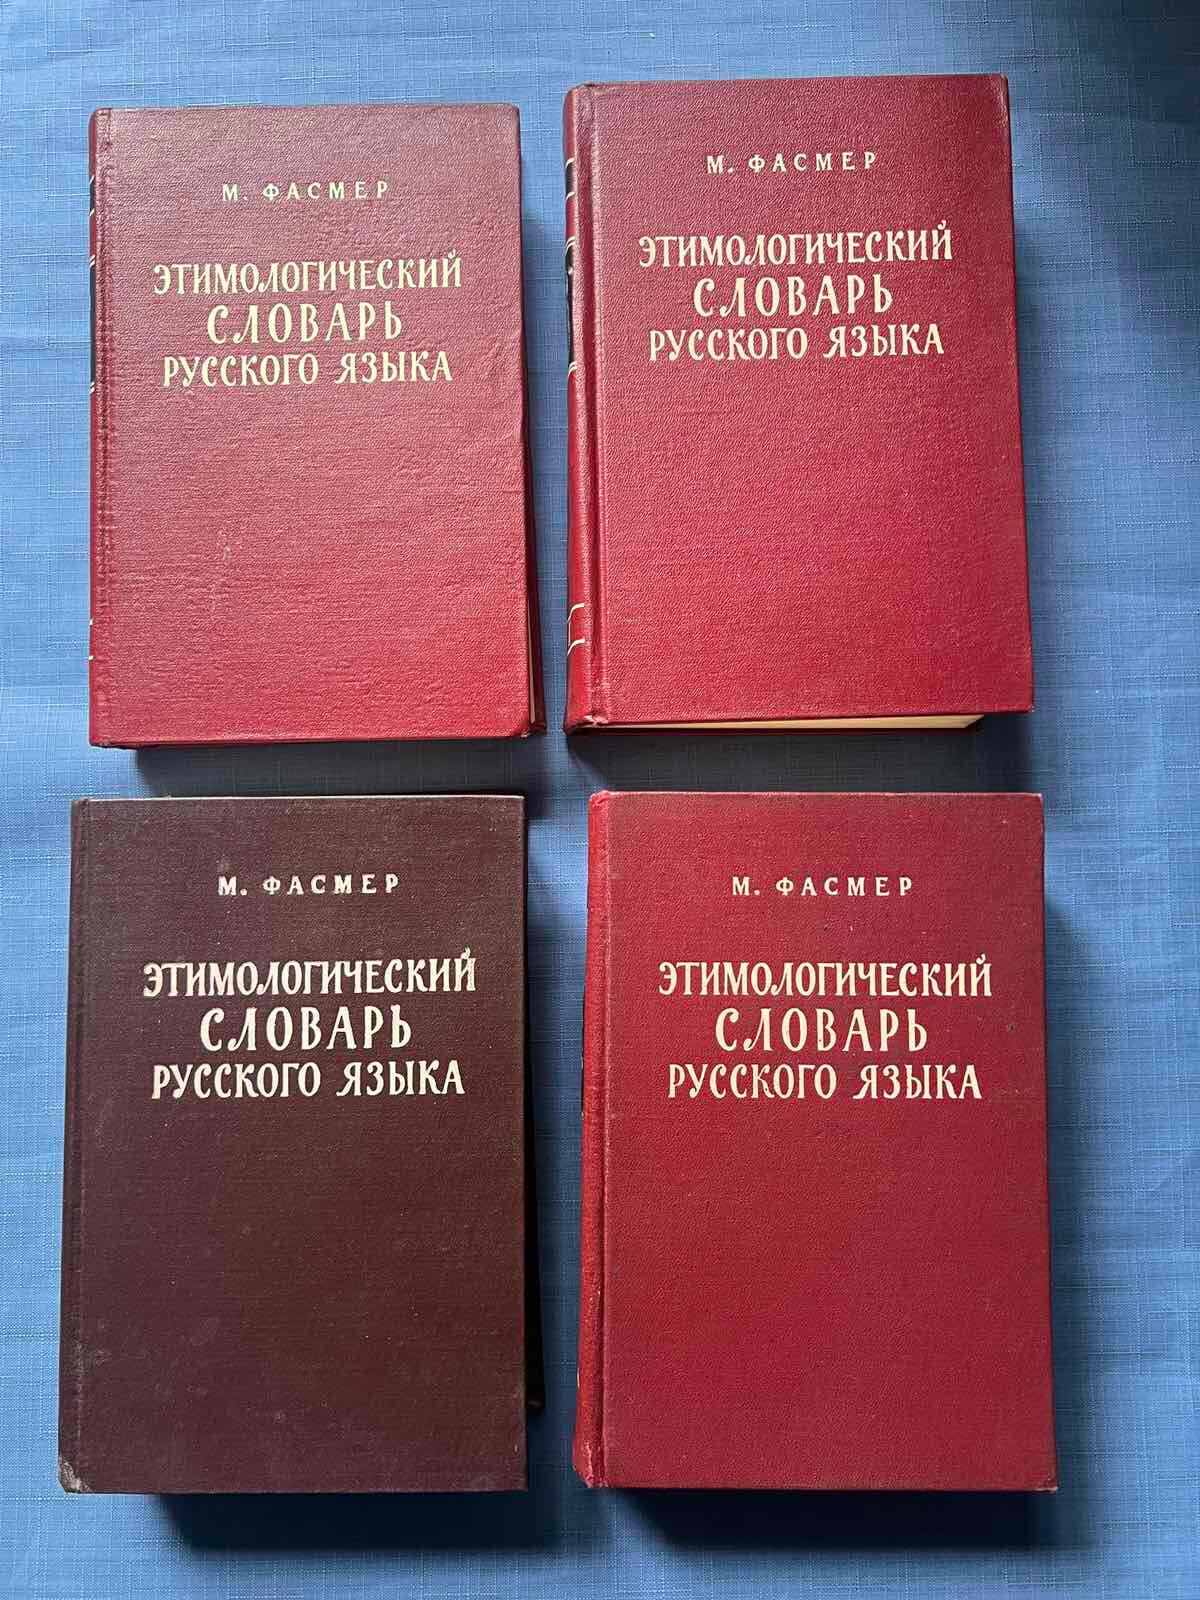 1964 Fasmer Etymological dictionary of Russian language set of 4 vol books rare